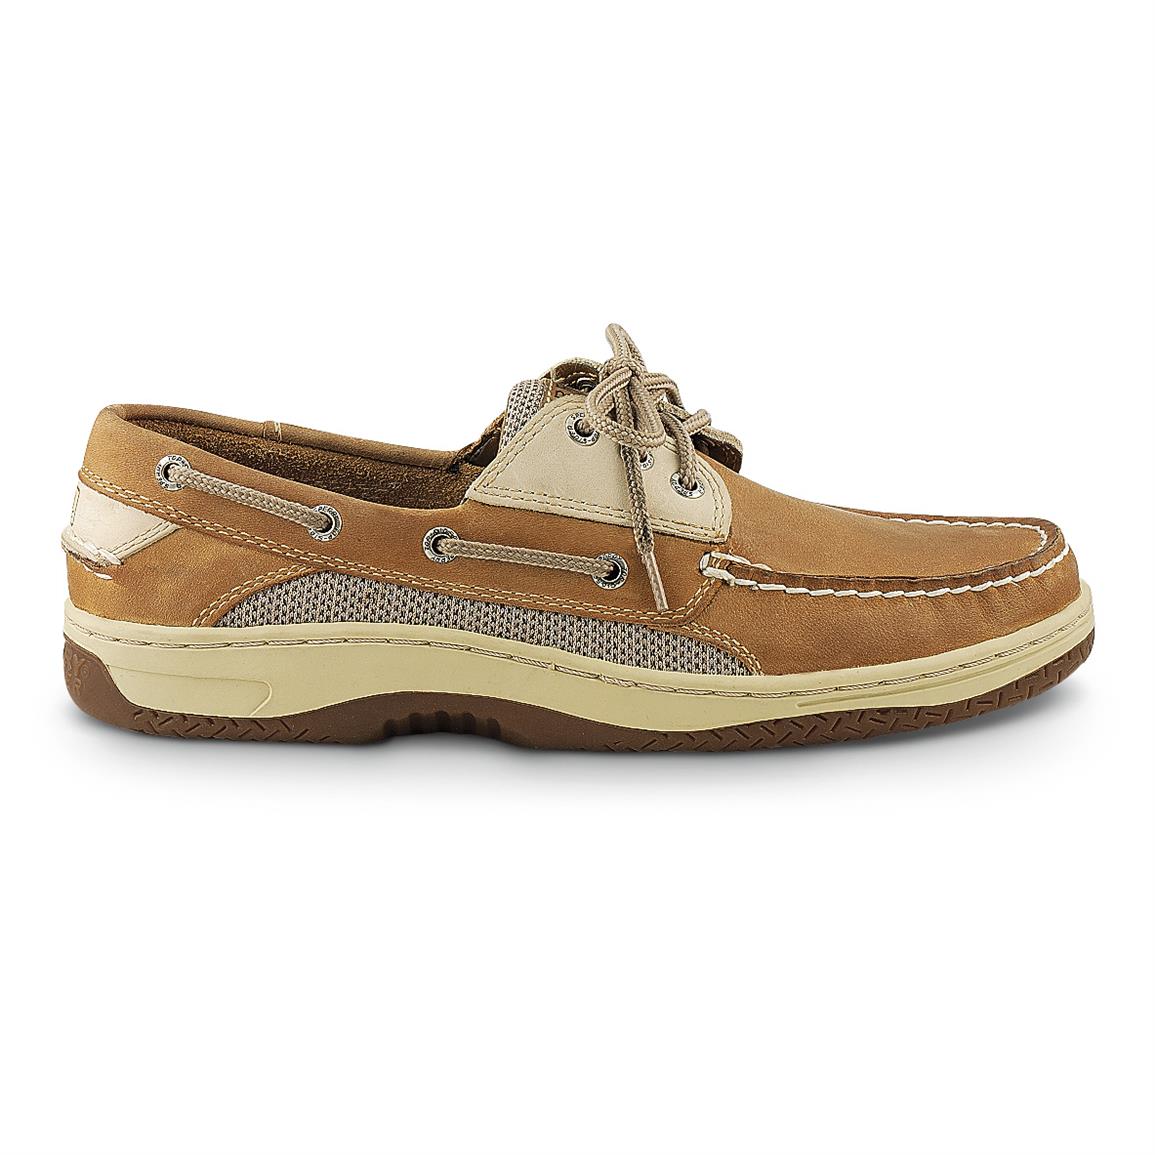 Sperry Men's Billfish 3-Eye Boat Shoes - 669537, Boat & Water Shoes at ...